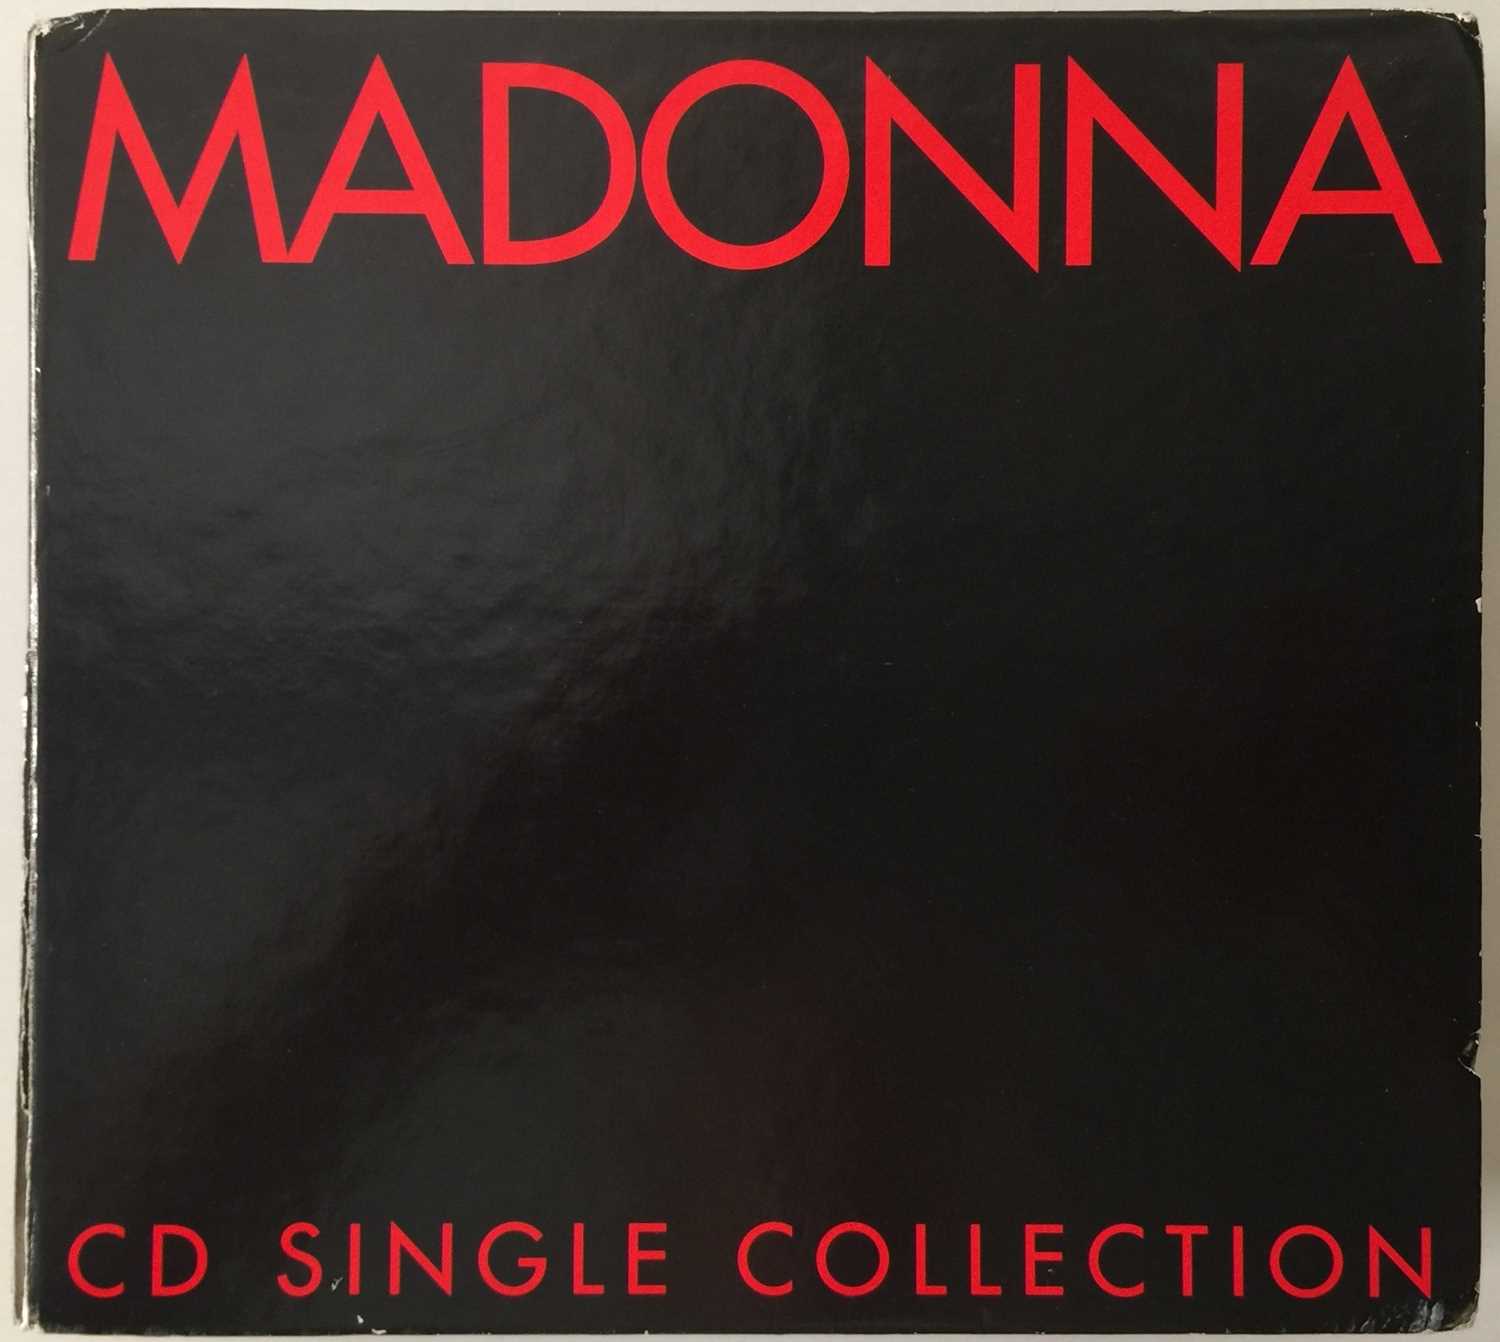 Lot 714 - MADONNA - CD SINGLE COLLECTION (LIMITED, madonna cd